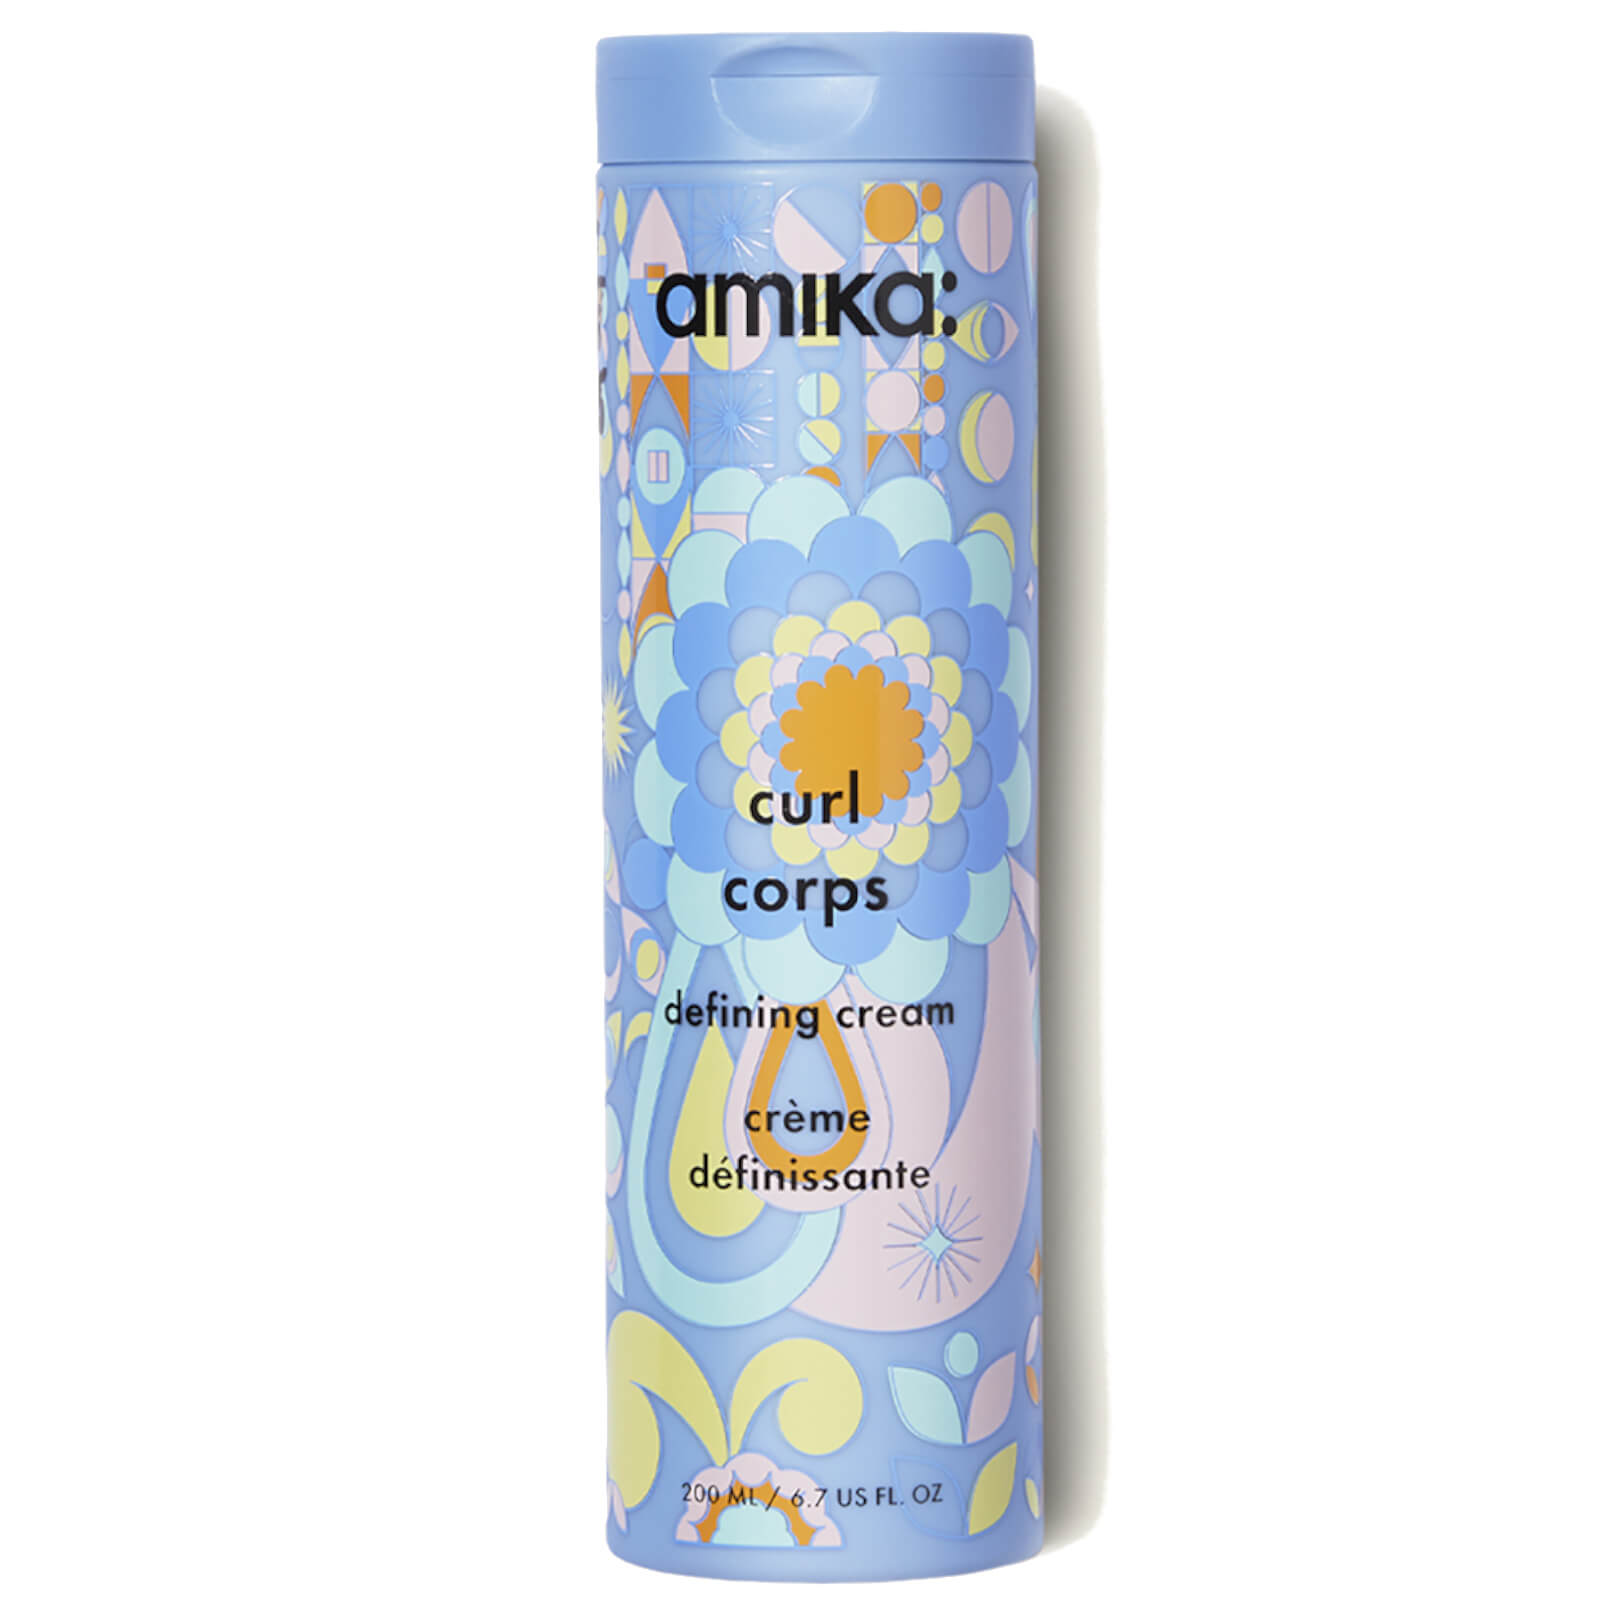 Photos - Hair Styling Product Amika Curl Corps Defining Cream - 200ml 